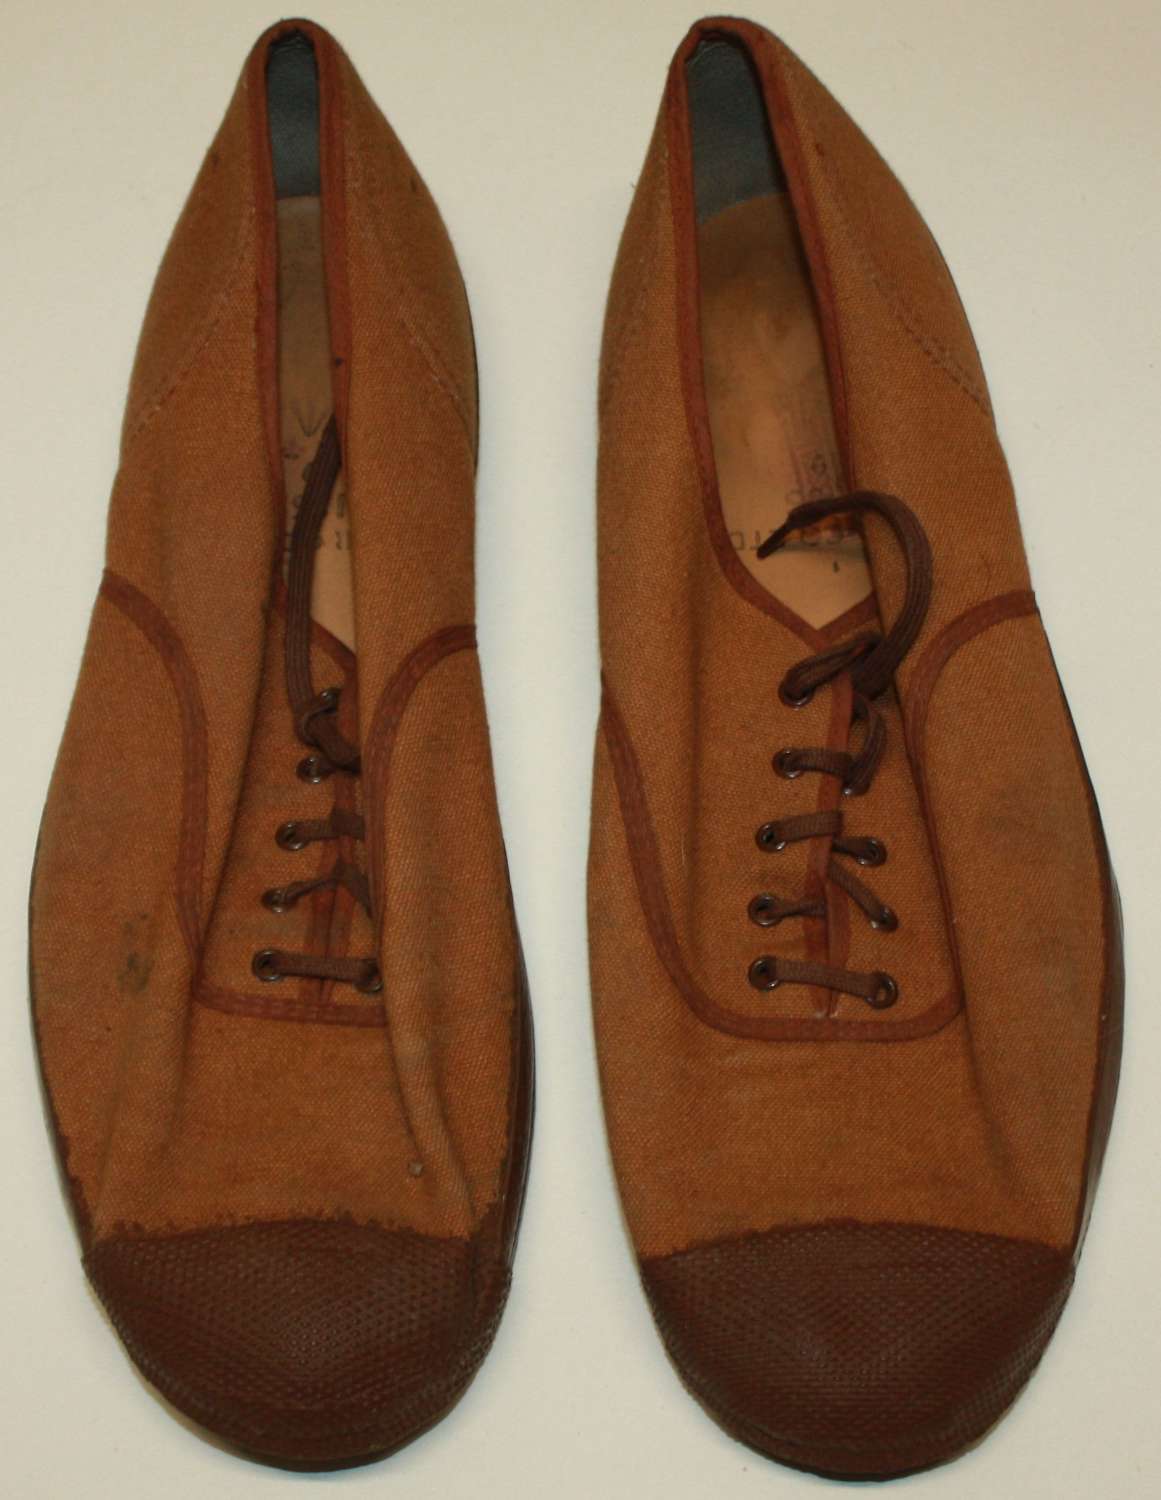 A GOOD PAIR OF THE WWII BRITISH SYLE PLIMSOLES 1955 DATED SIZE 9